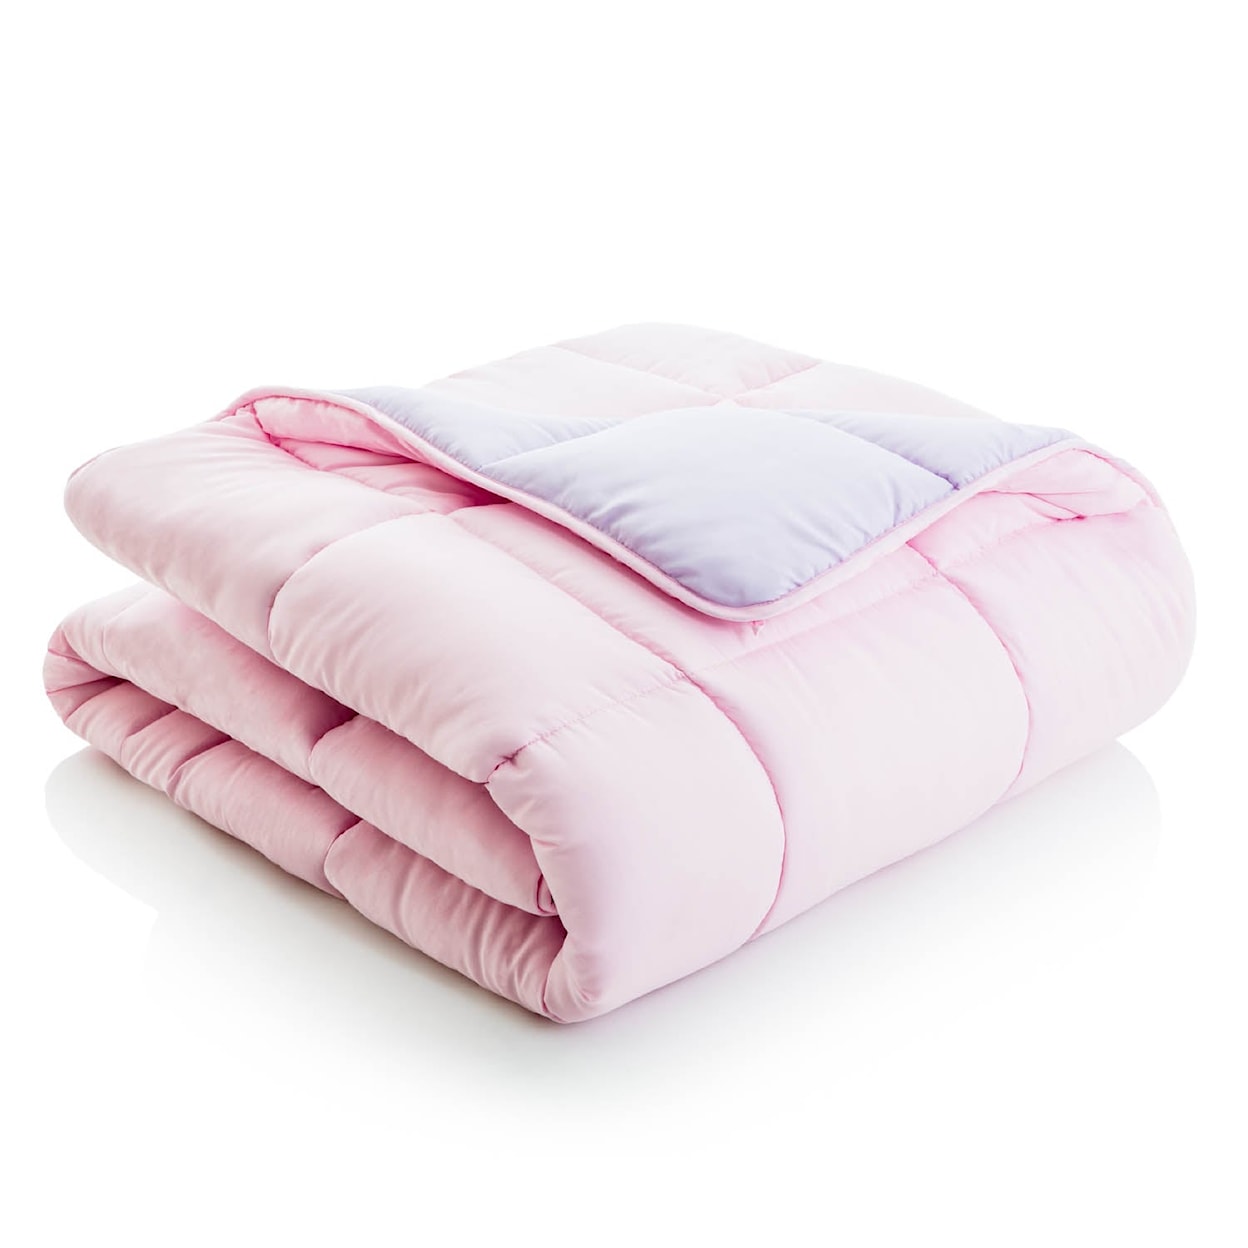 Malouf Reversible Bed in a Bag Twin Xl Lilac Reversible Bed in a Bag